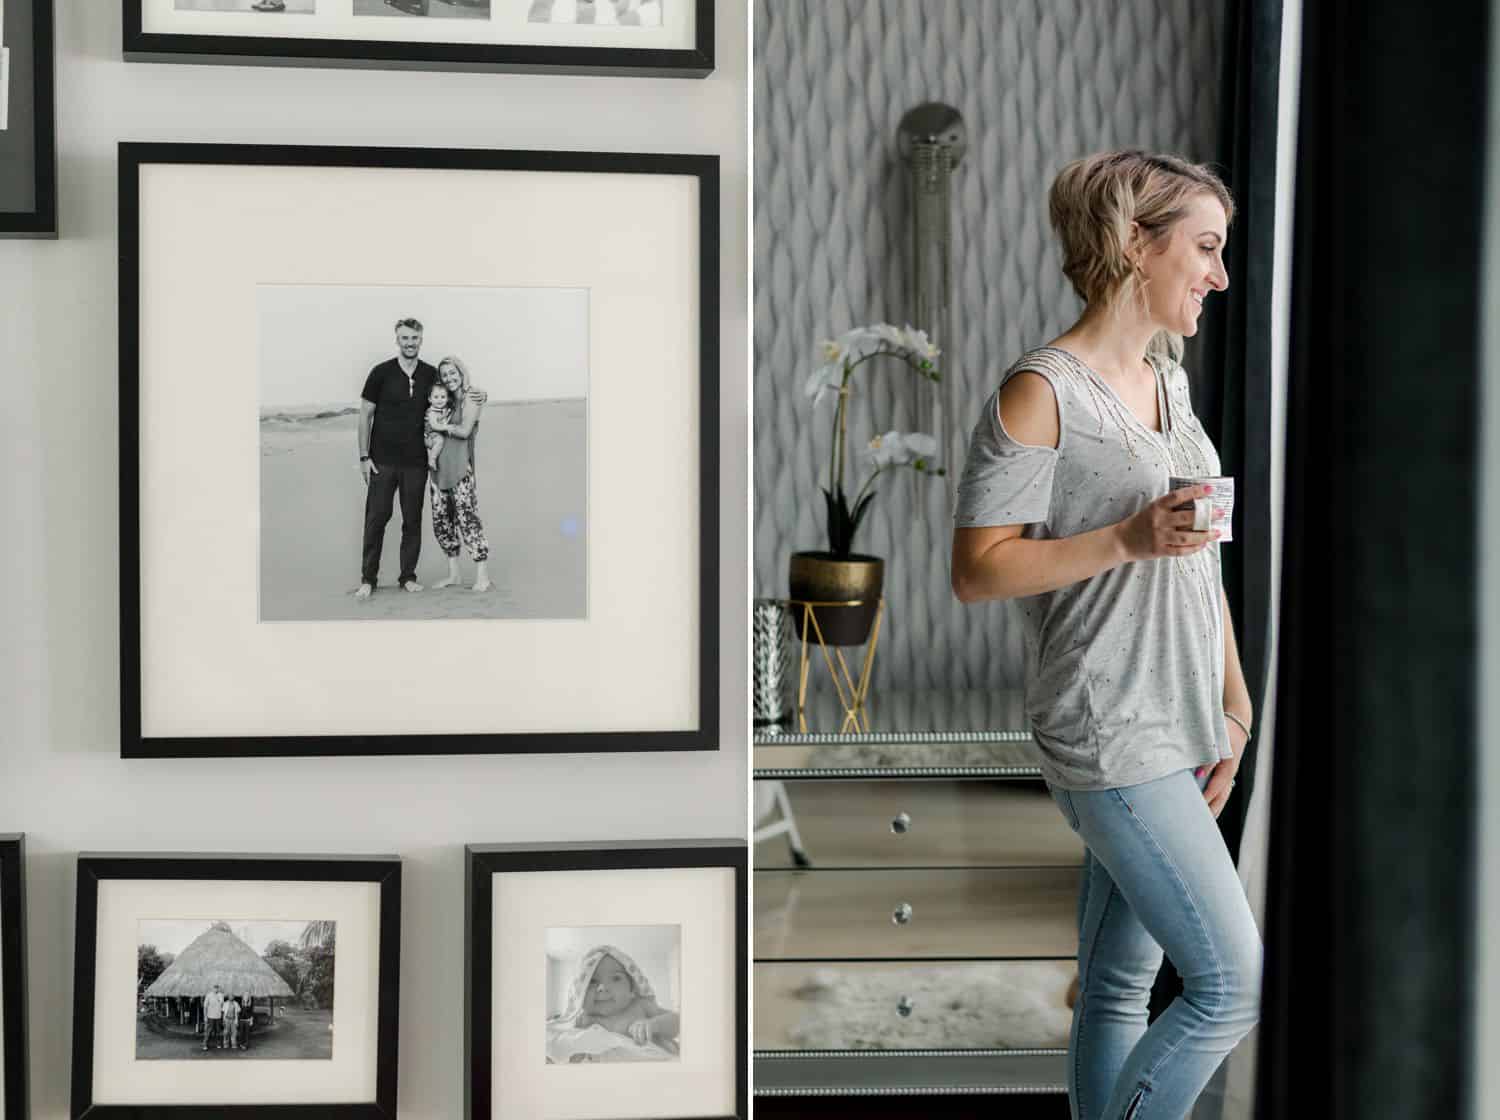 Black and white prints cover a home's wall. A woman stands at the window holding a cup of coffee.